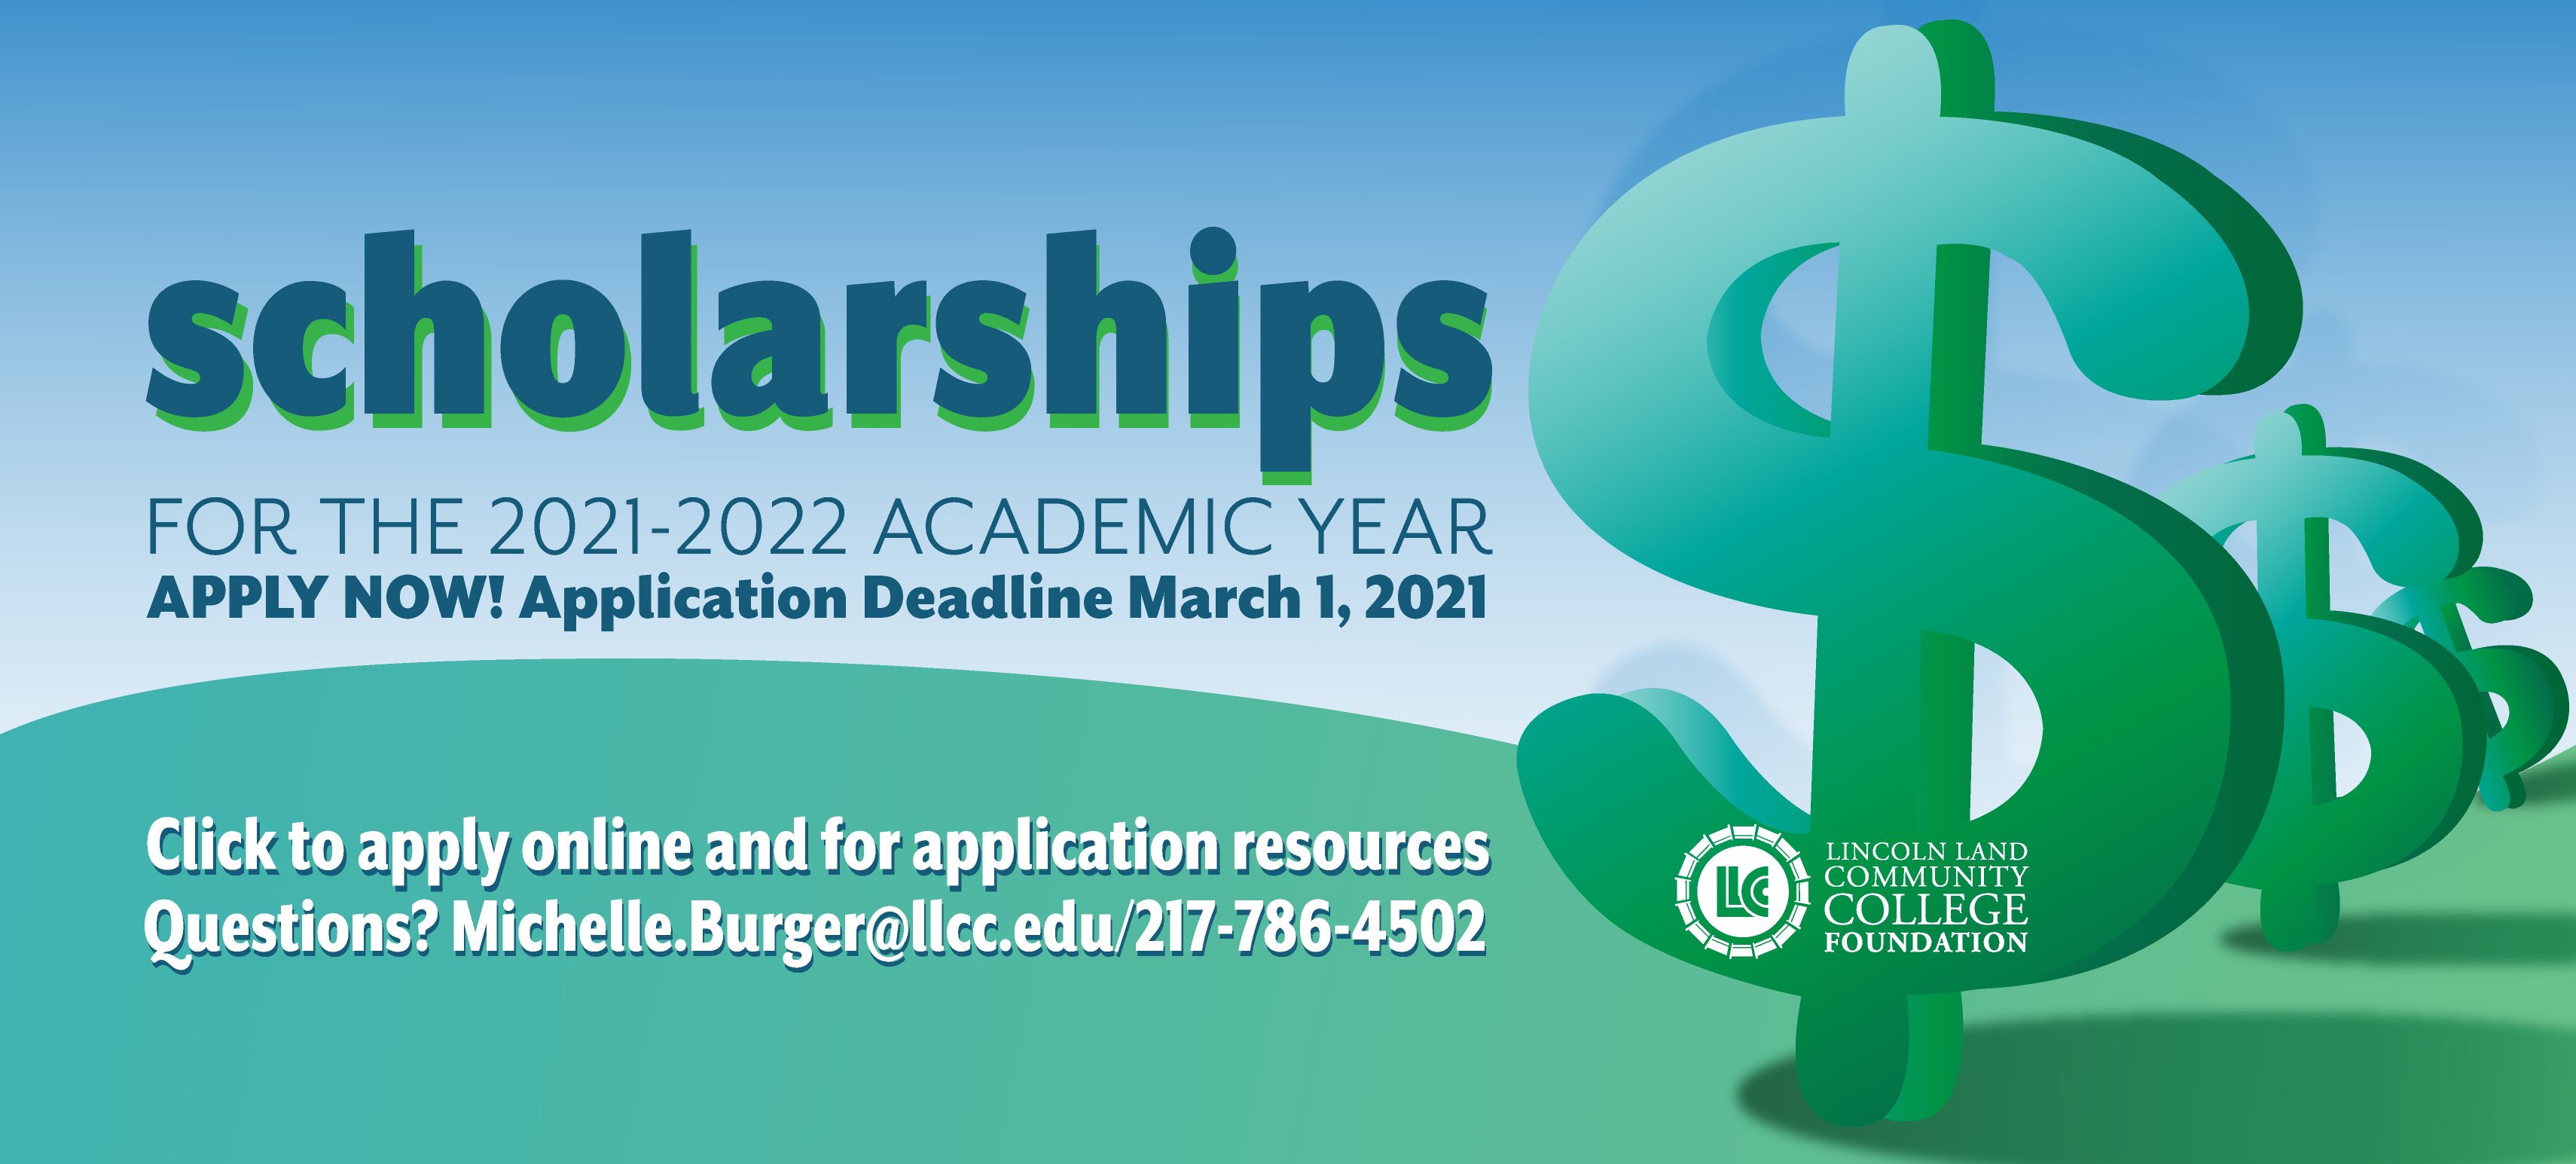 Lincoln Land Community College Foundation scholarships for the 2021-2022 academic year. Apply now! Application Deadline March 1, 2021. Click to apply online and for application resources. Questions? Michelle.Burger@llcc.edu 217-786-4502.